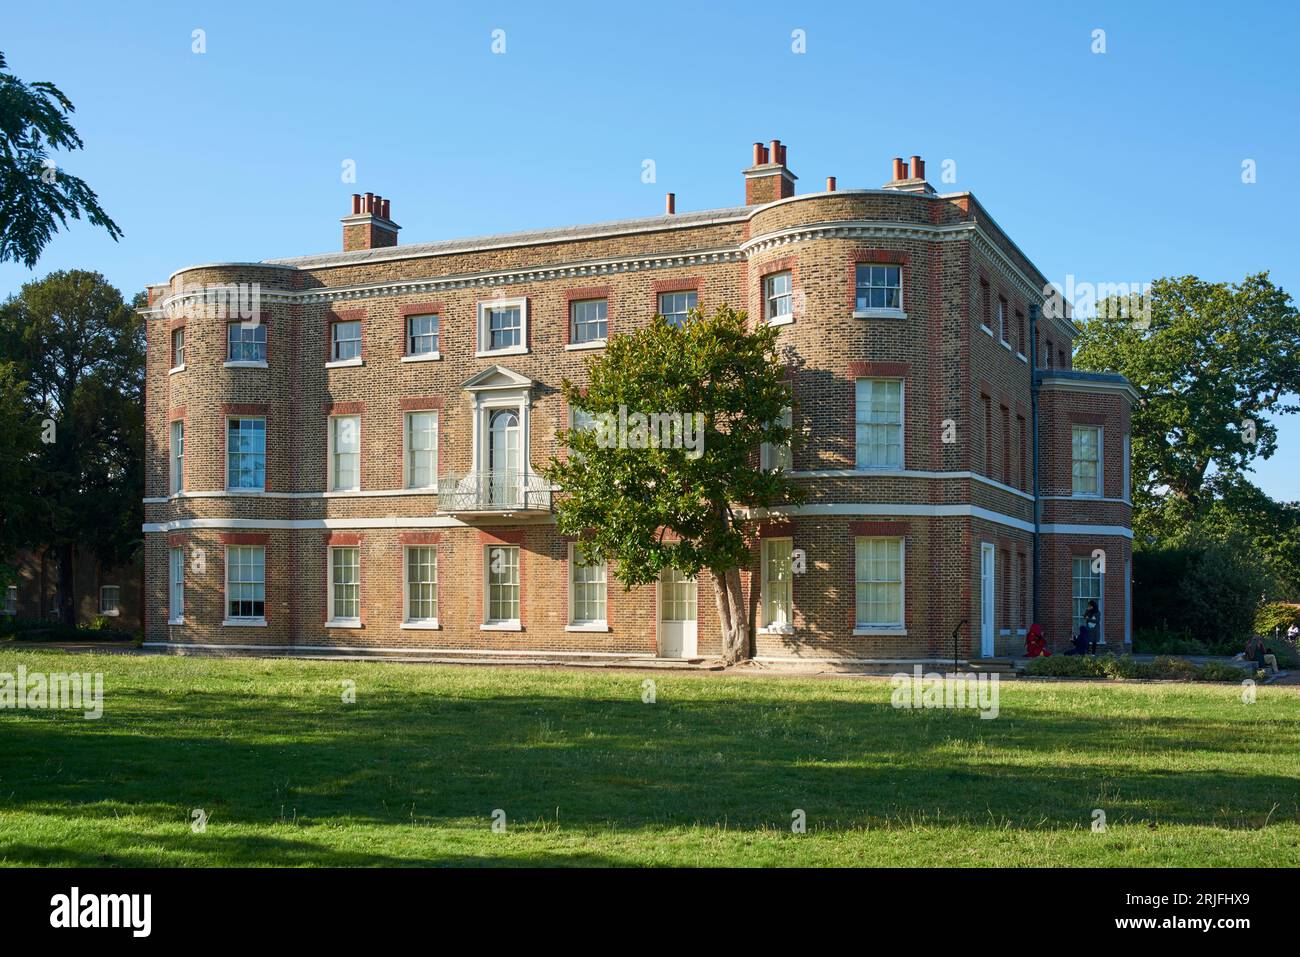 The 17th century Valentines Mansion viewed from the back, in Valentines Park, Ilford, Greater London UK Stock Photo